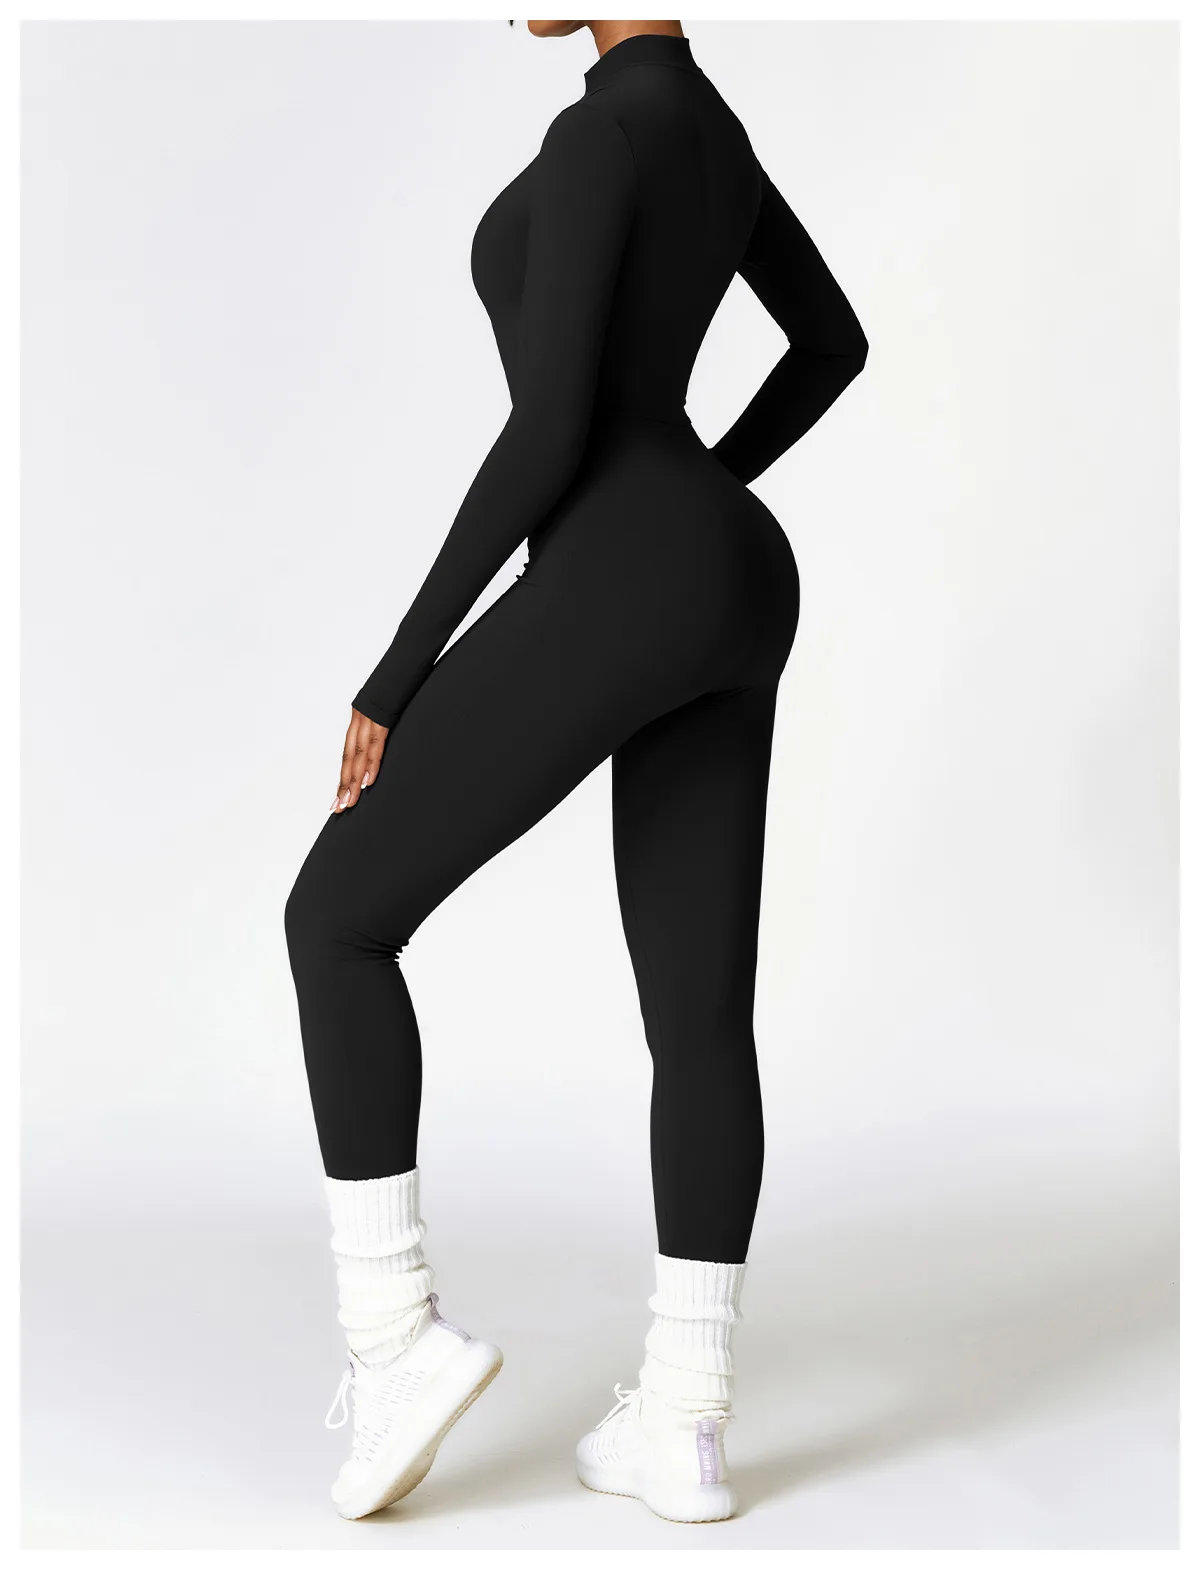 Winter Cashmere One-piece Yoga Clothing Long Sleeve Warm Outside ...